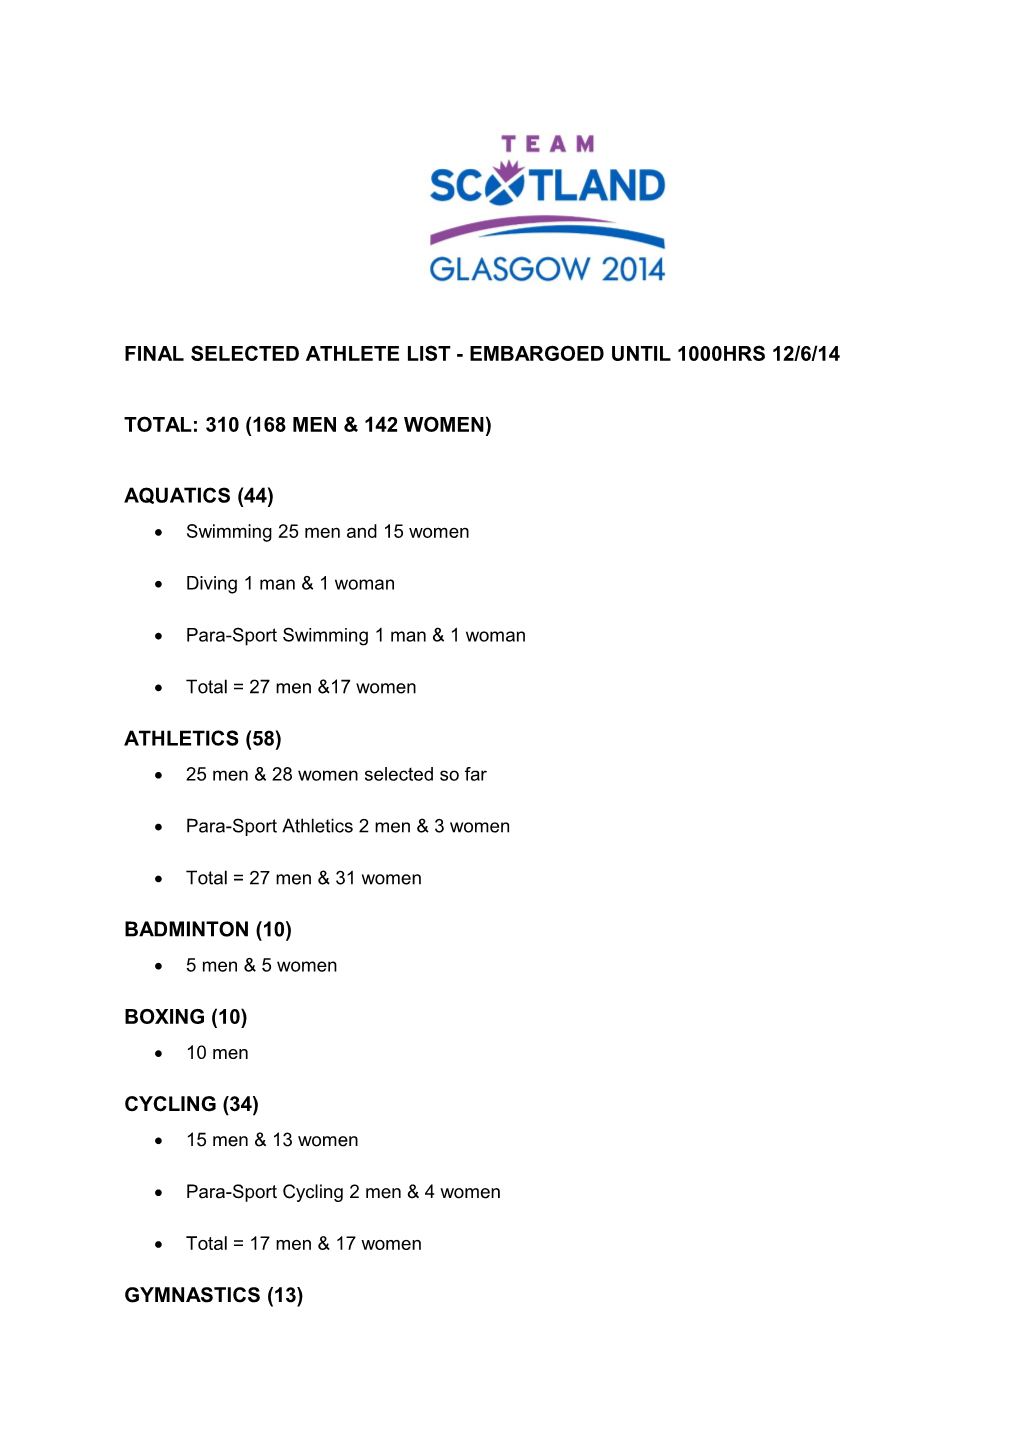 Final Selected Athlete List - Embargoed Until 1000Hrs 12/6/14